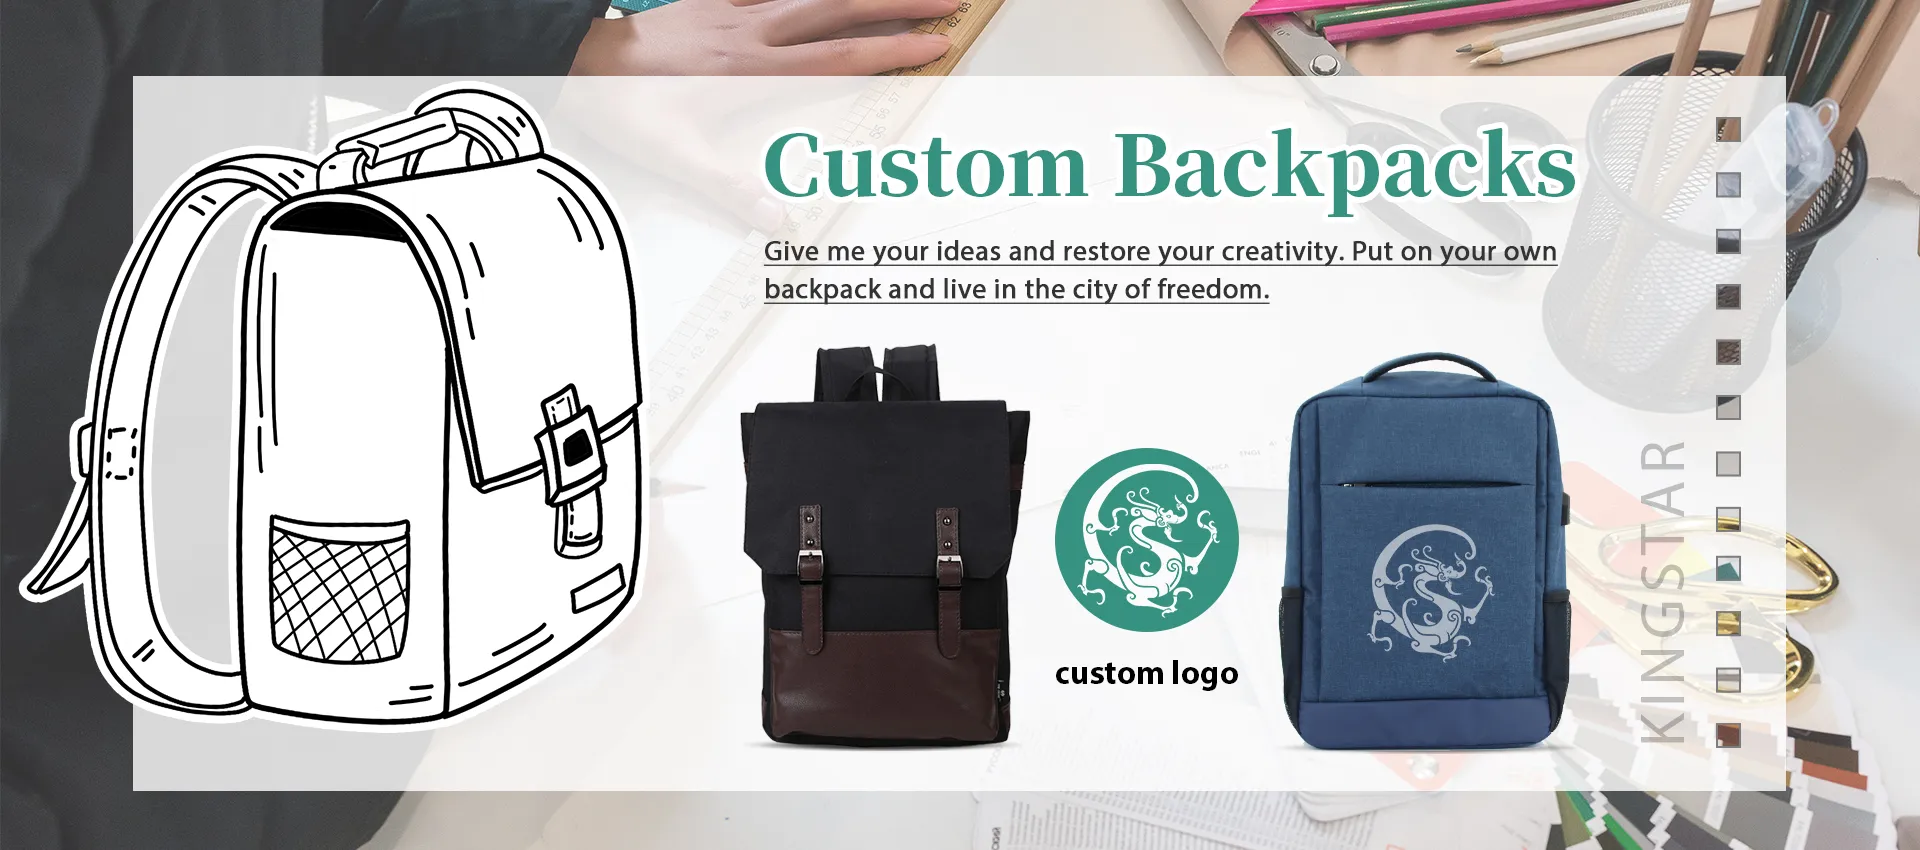 Personalise your own backpack